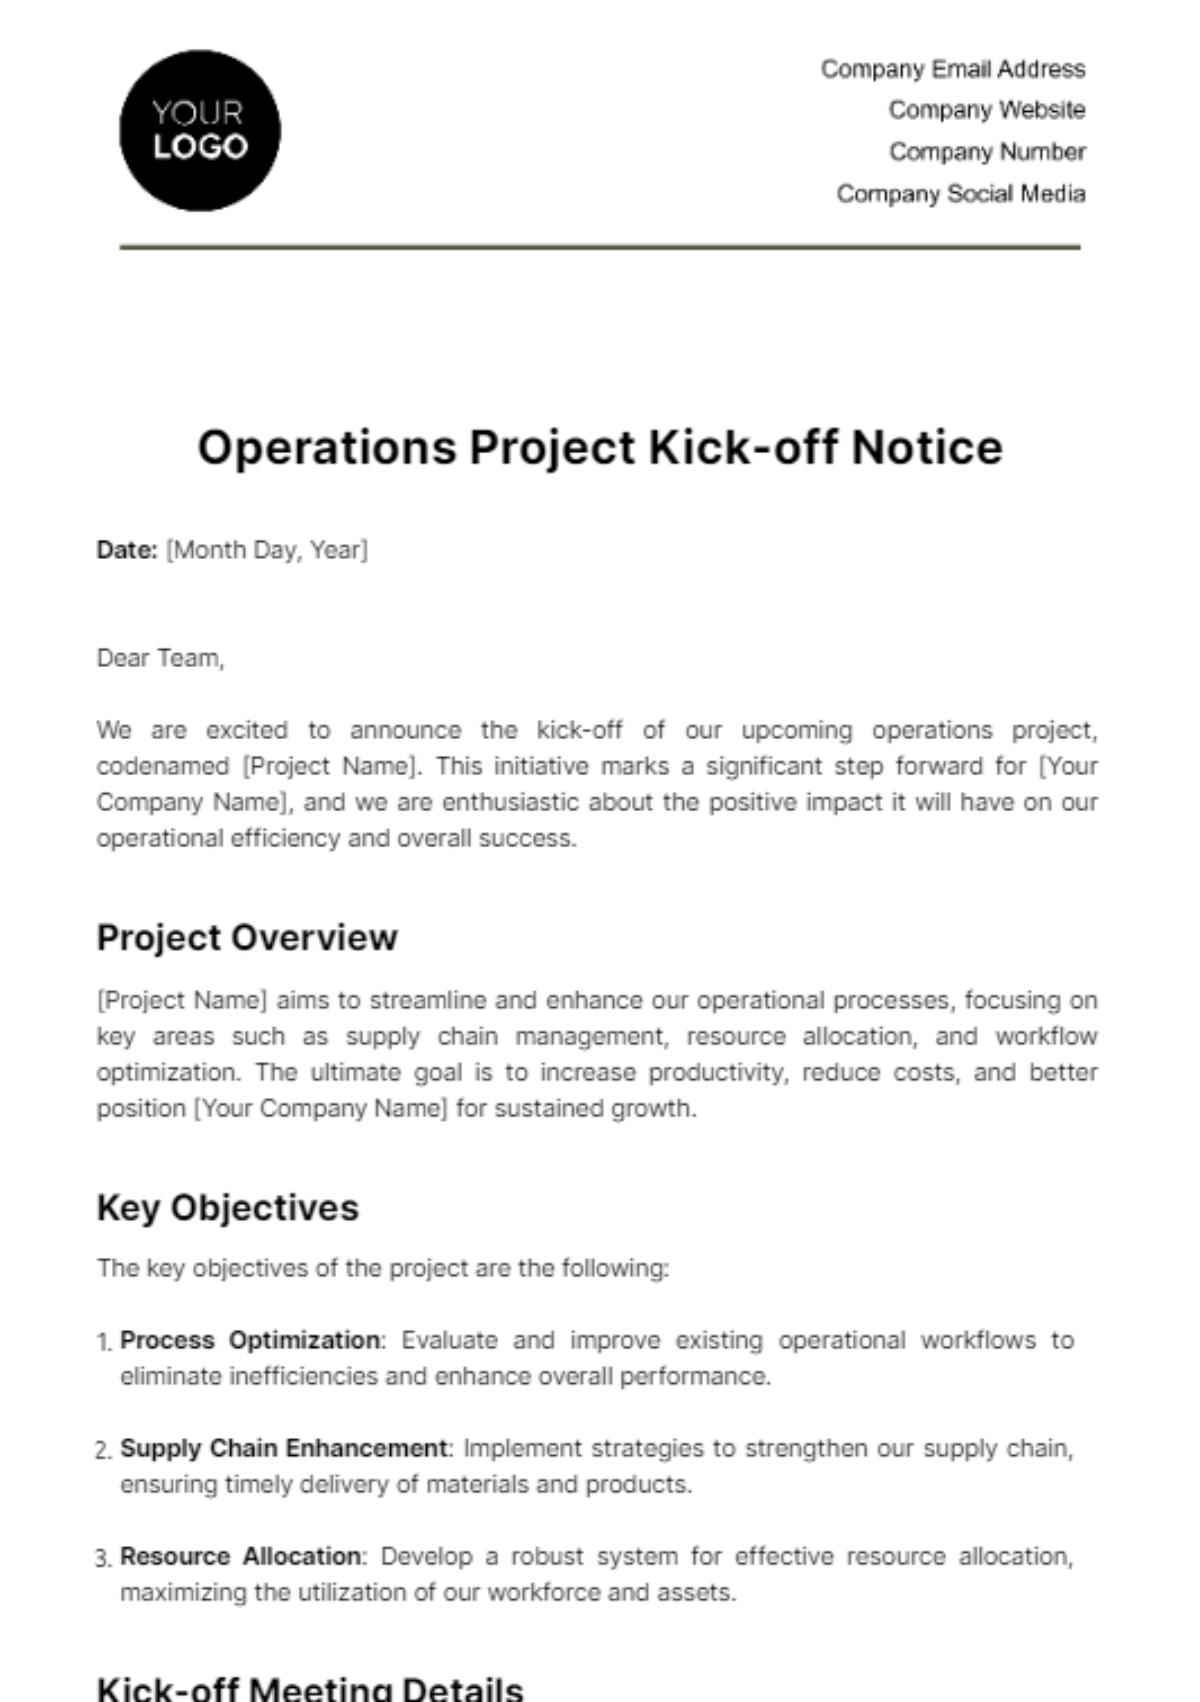 Operations Project Kick-off Notice Template